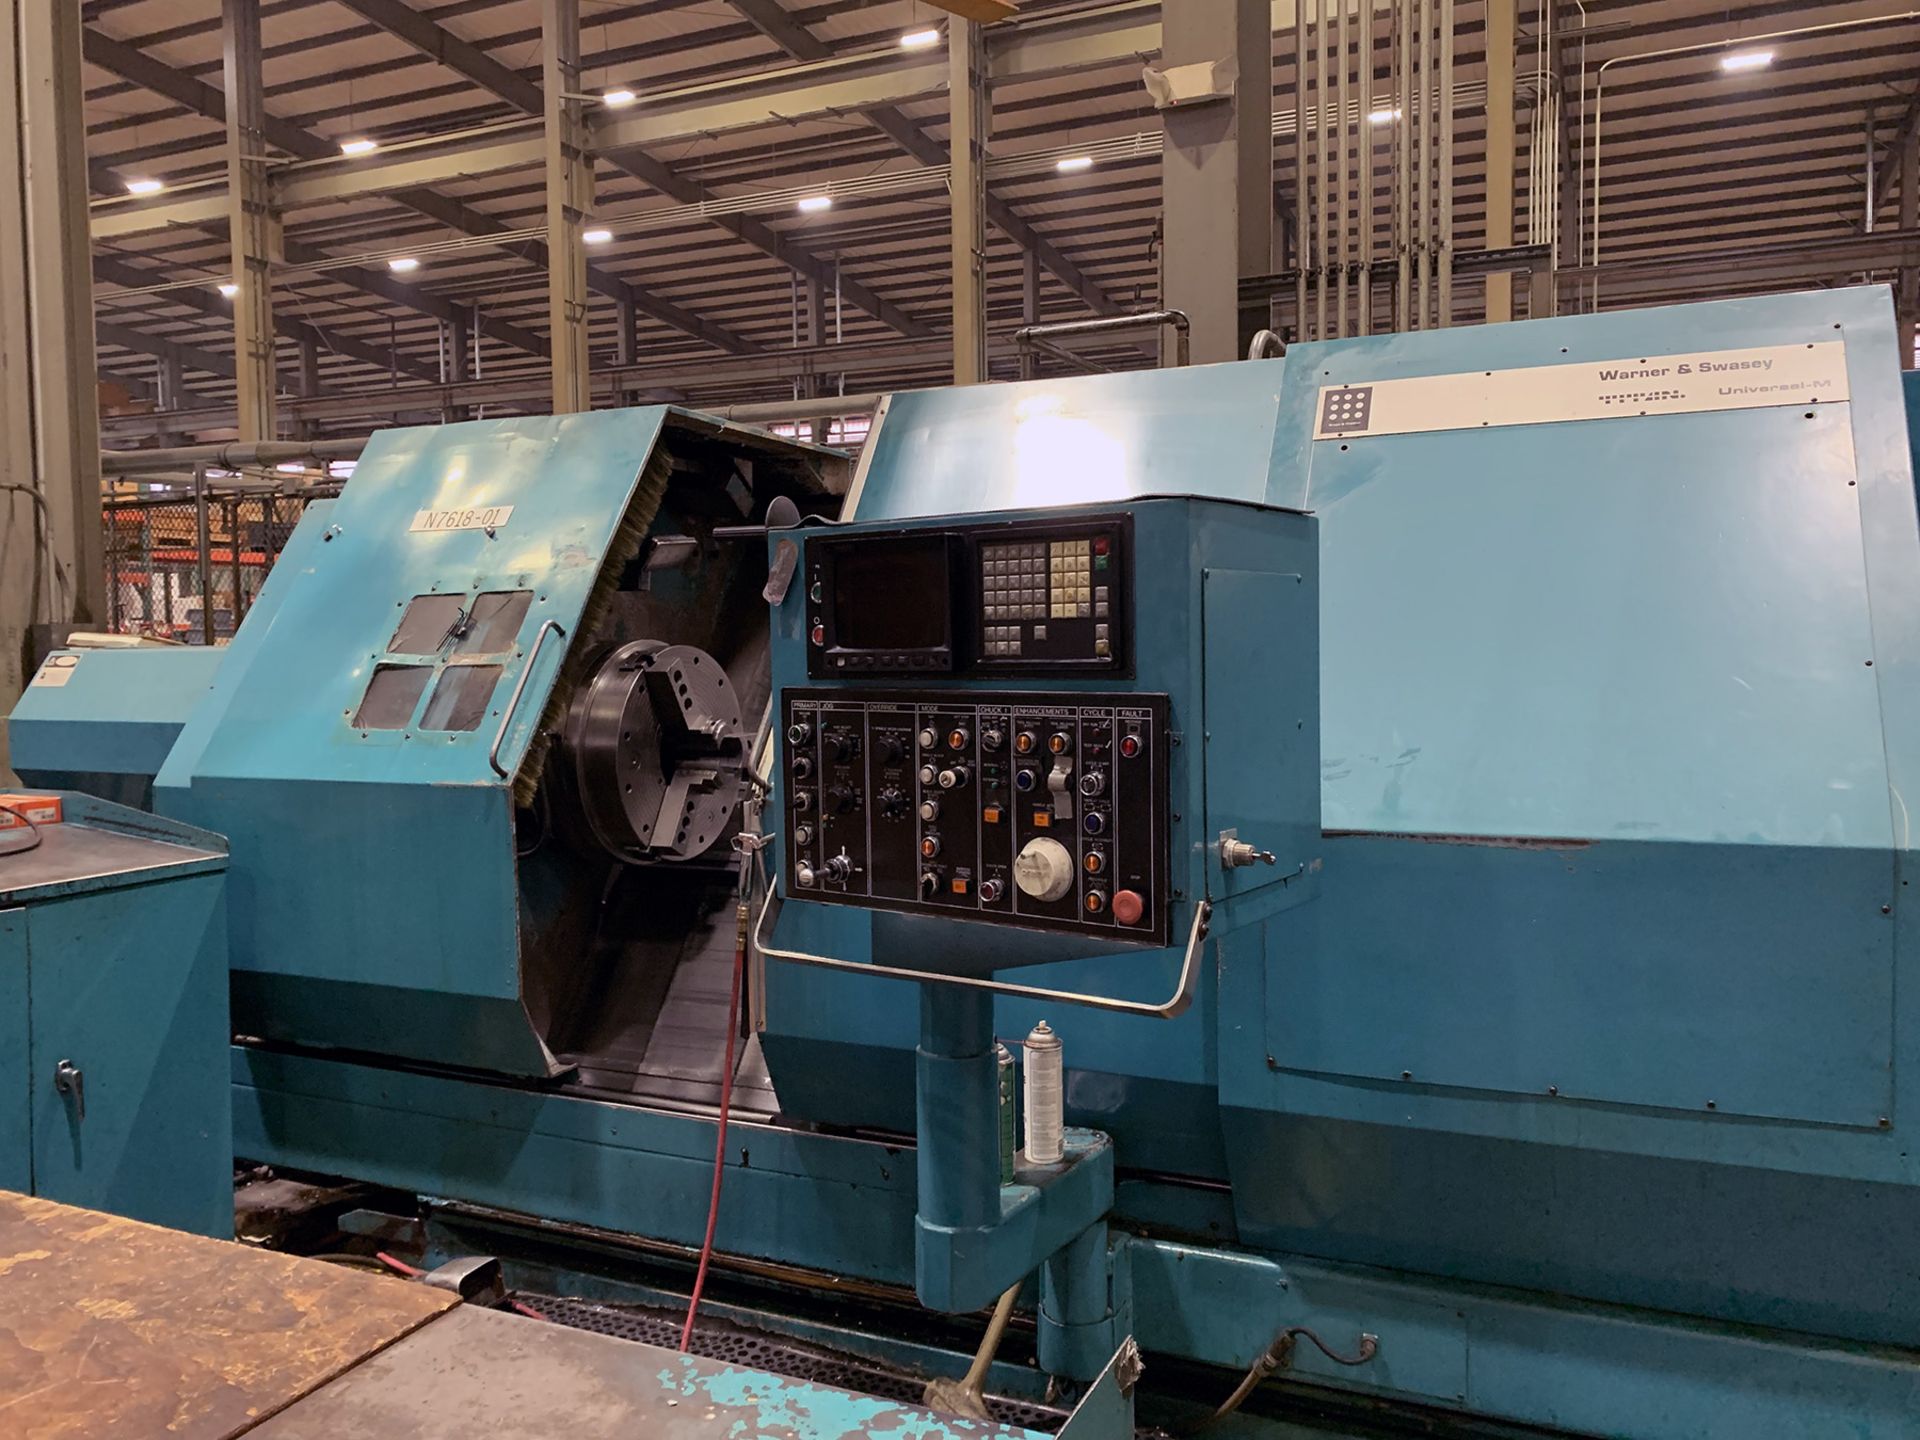 Warner & Swasey CNC Titan Mill/Turn Lathe, new 1986, installed 2000, 29" swing over bed, 18.5"